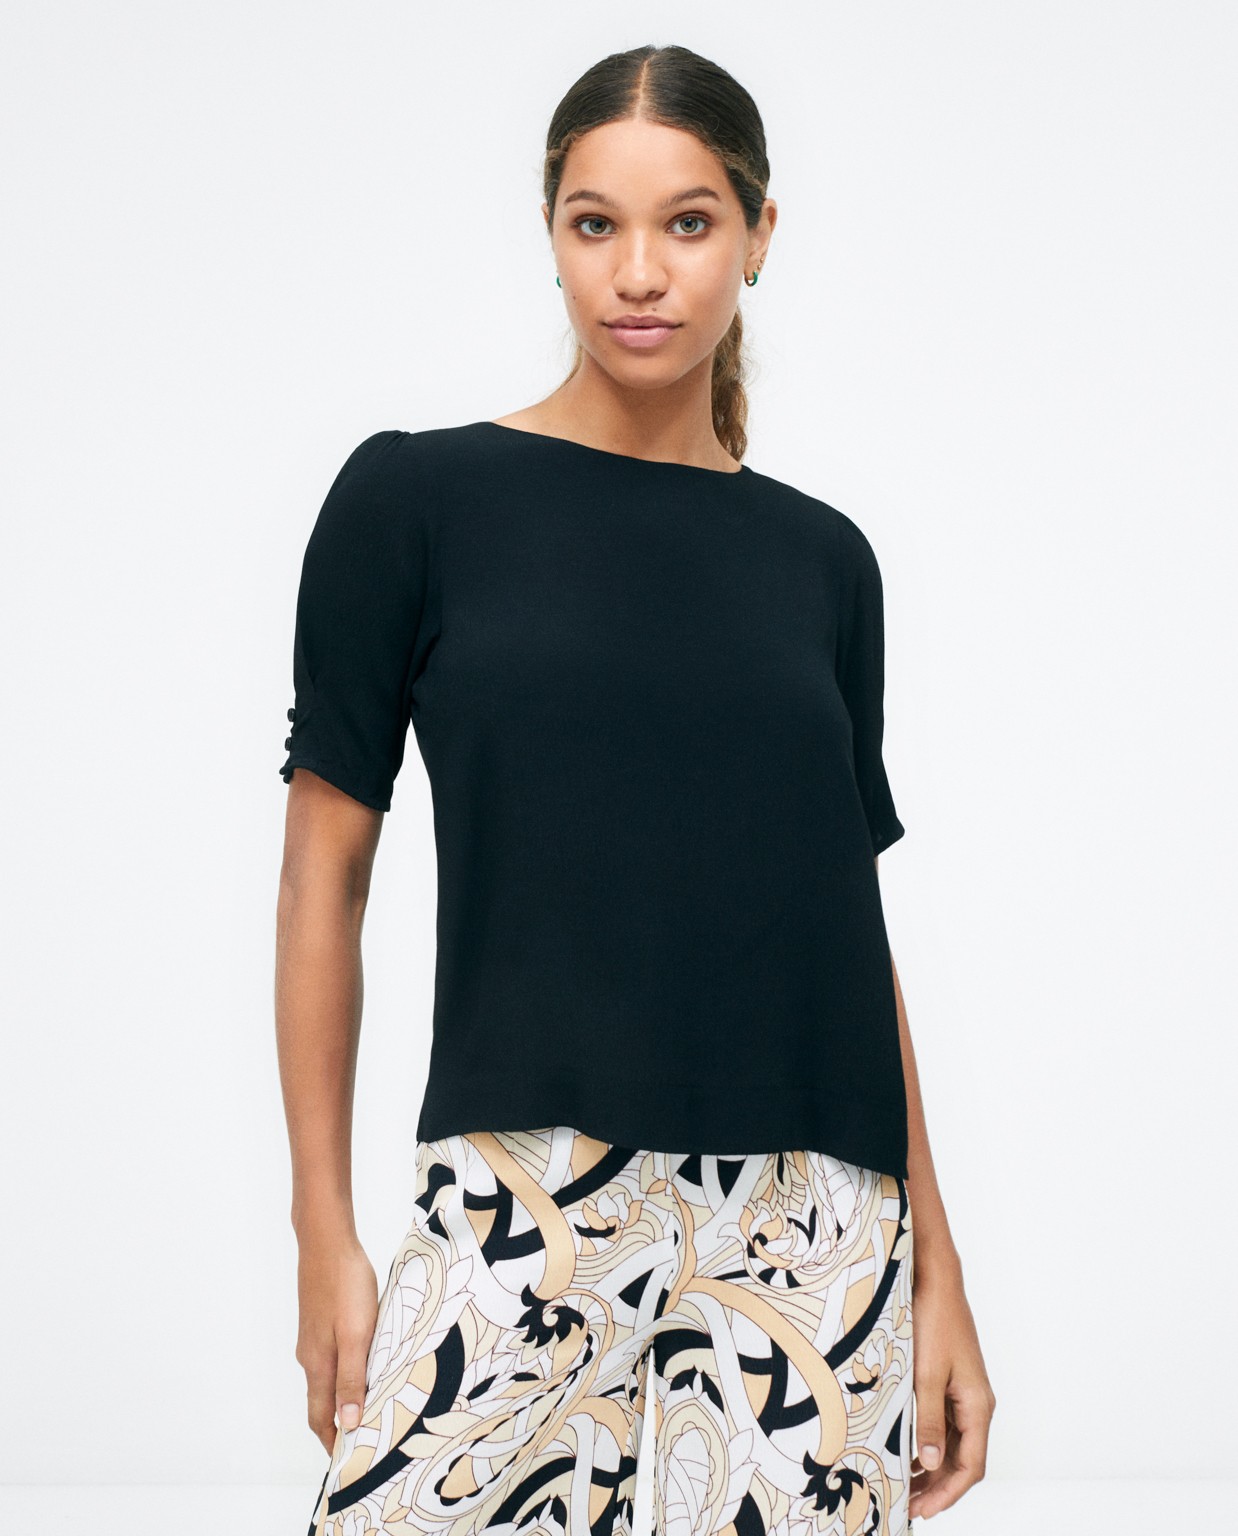 French sleeve blouse with buttoned back.  Black